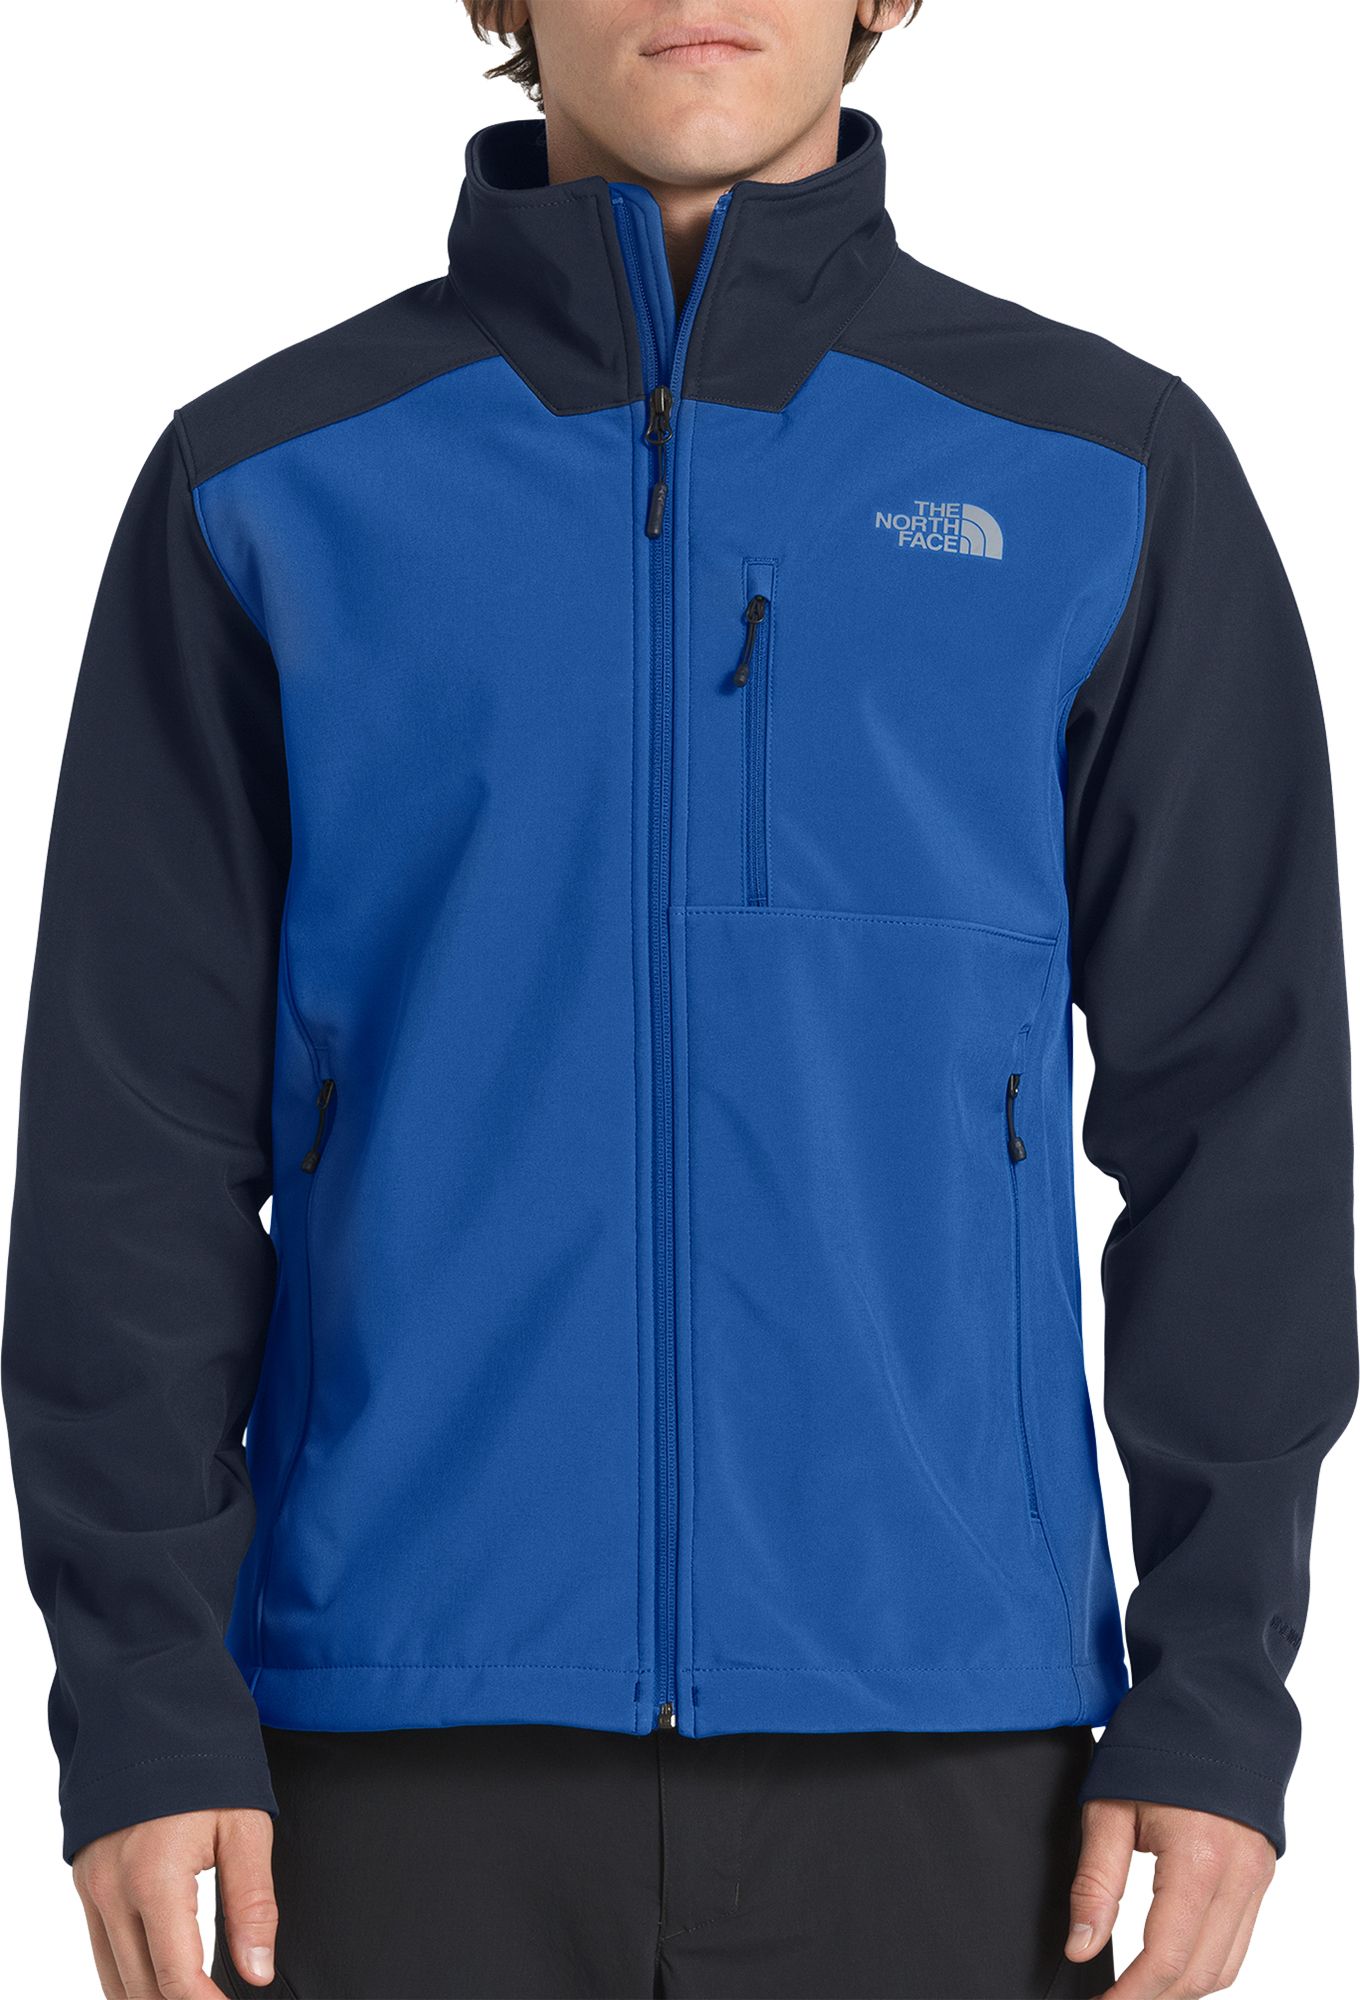 the north face men's apex bionic 2 soft shell jacket